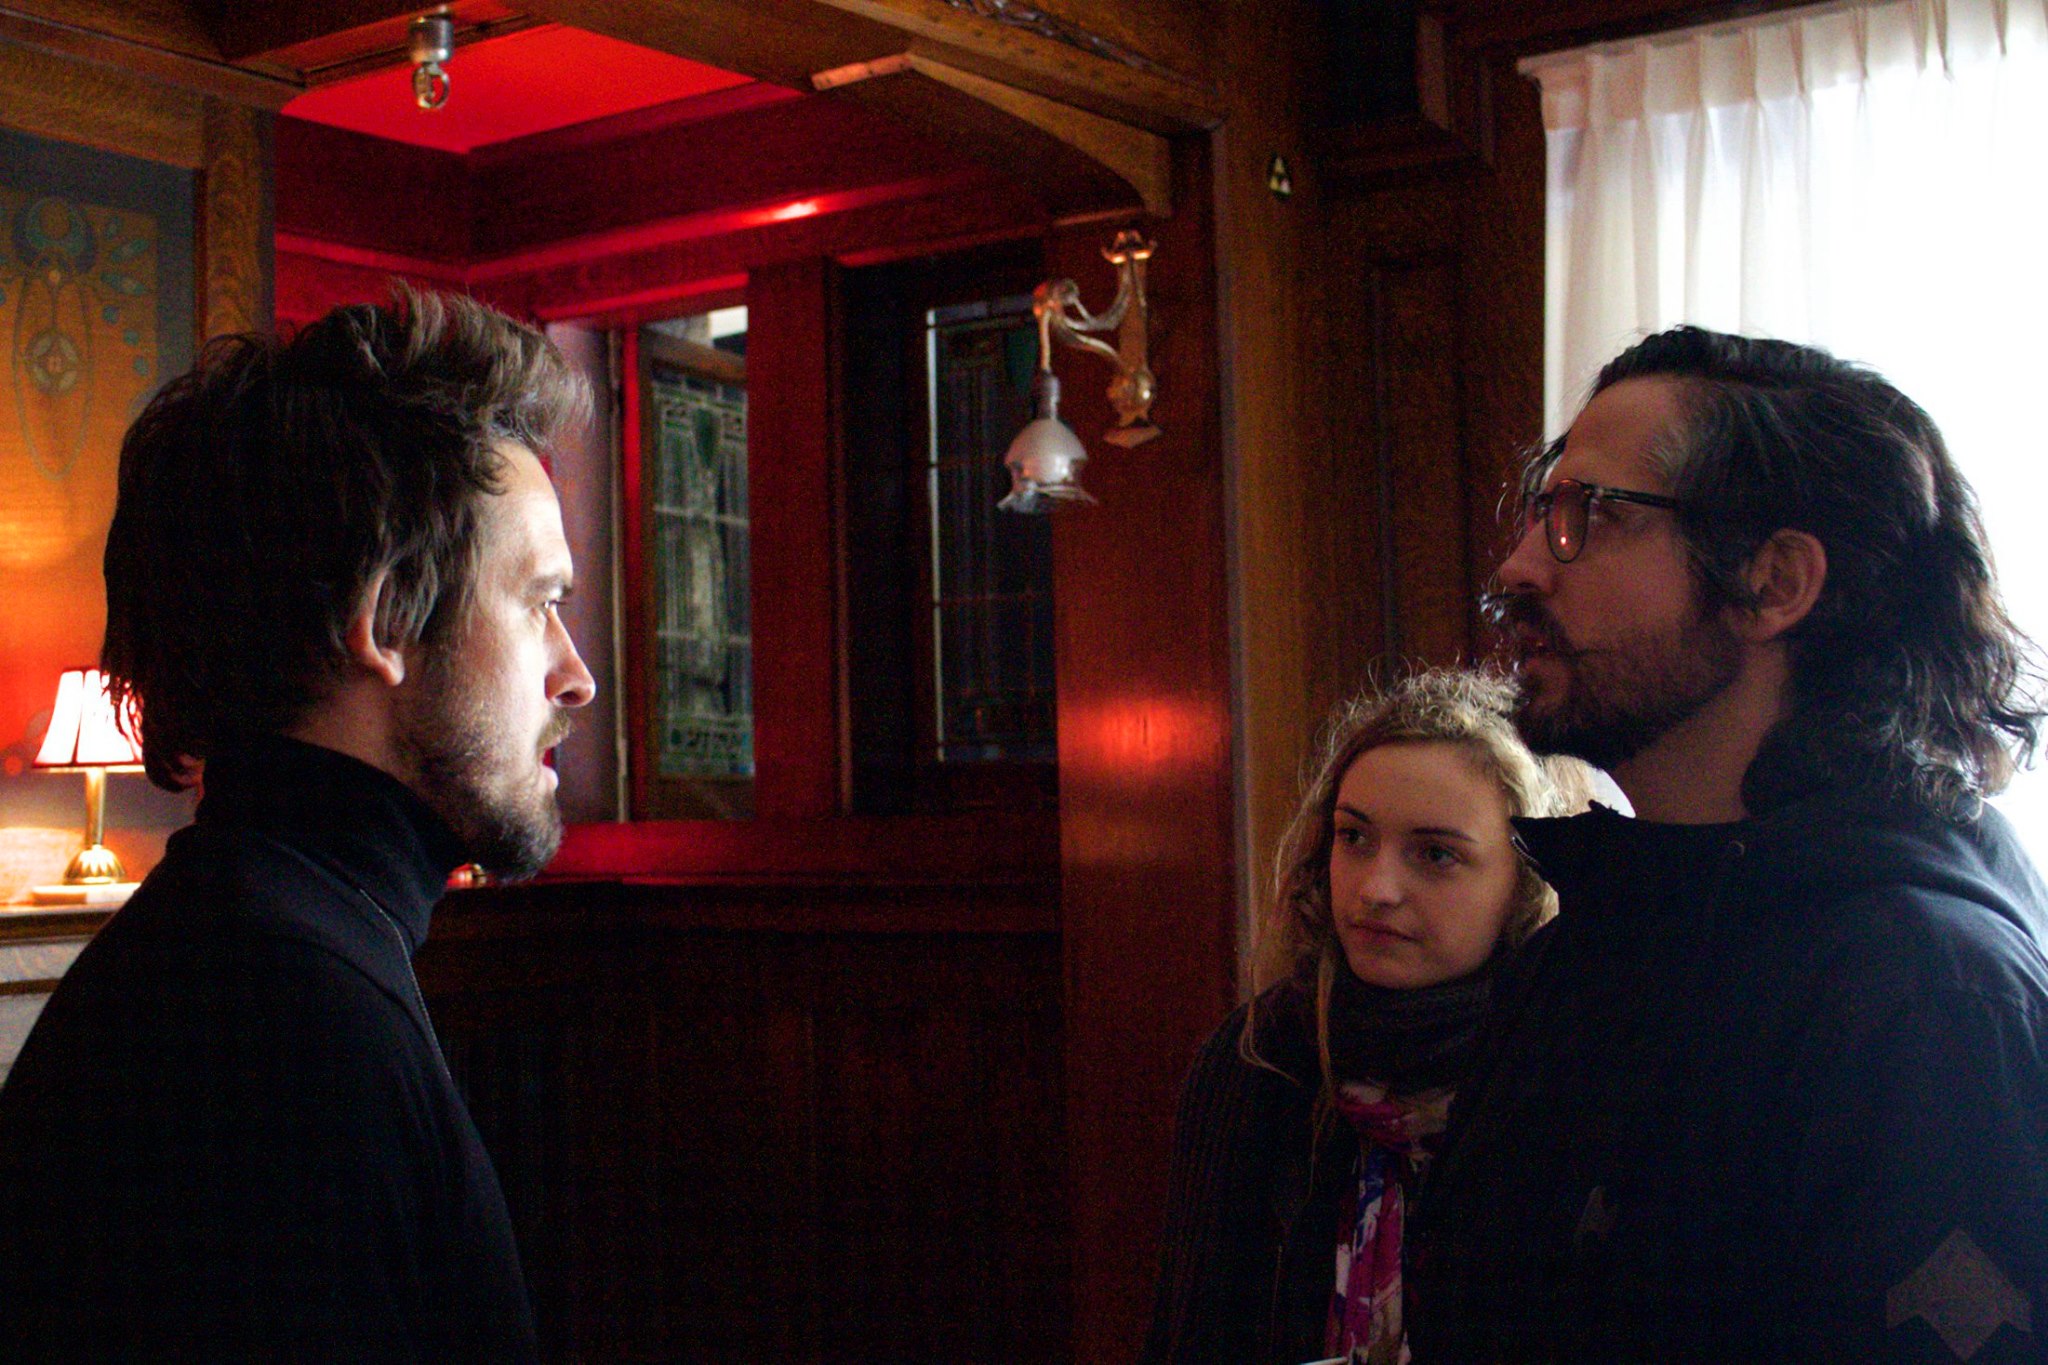 The Third Bandit. Director David I. Strasser with Producer Jessica L. Randall and Actor Will Kemp.